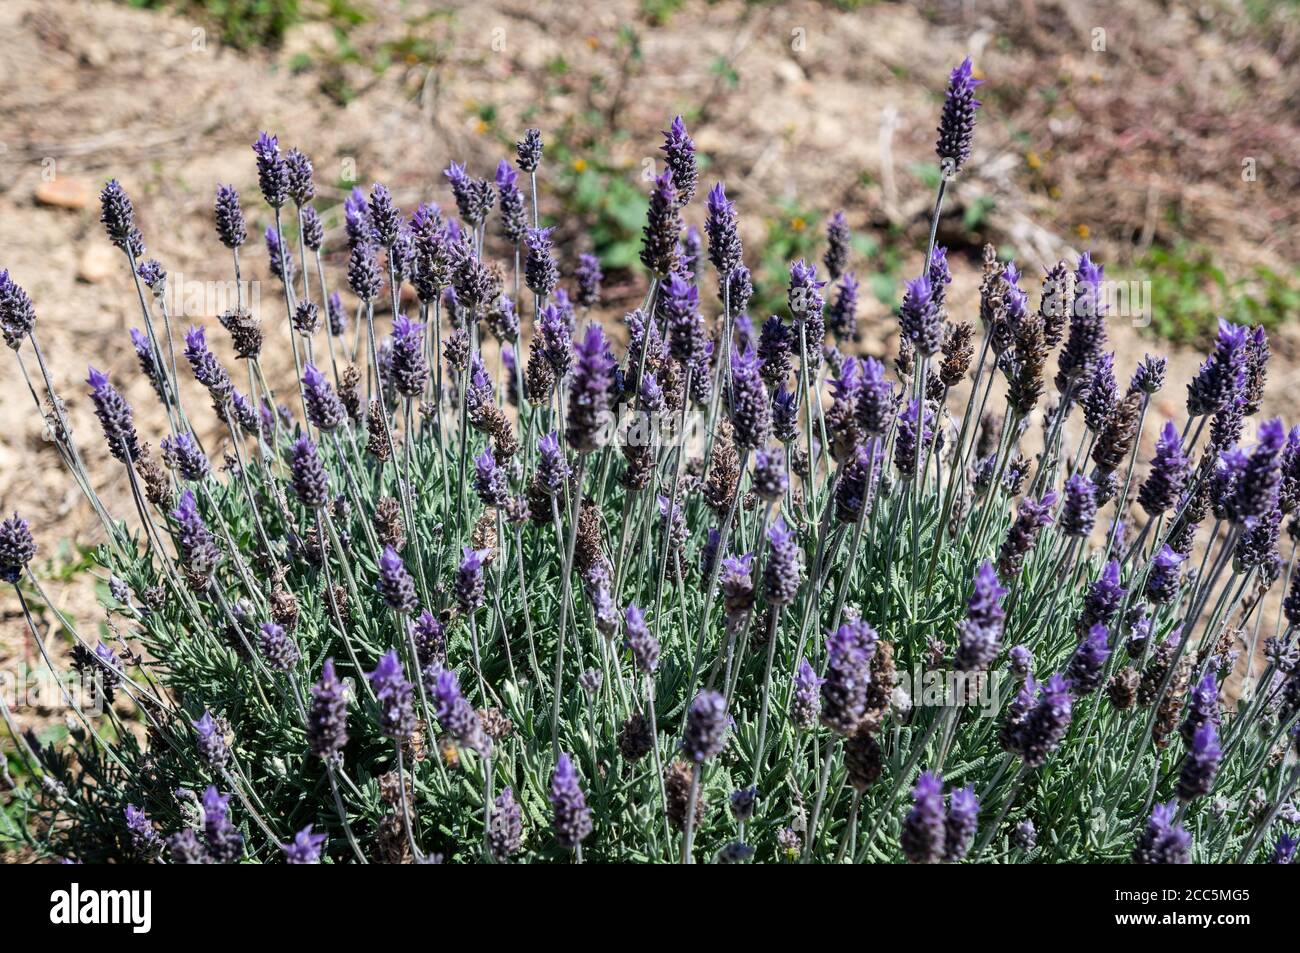 Lavender flowers (Lavandula dentata - species of flowering plant, Lamiaceae family) cultivated in the agriculture fields of Cunha, Sao Paulo, Brazil. Stock Photo